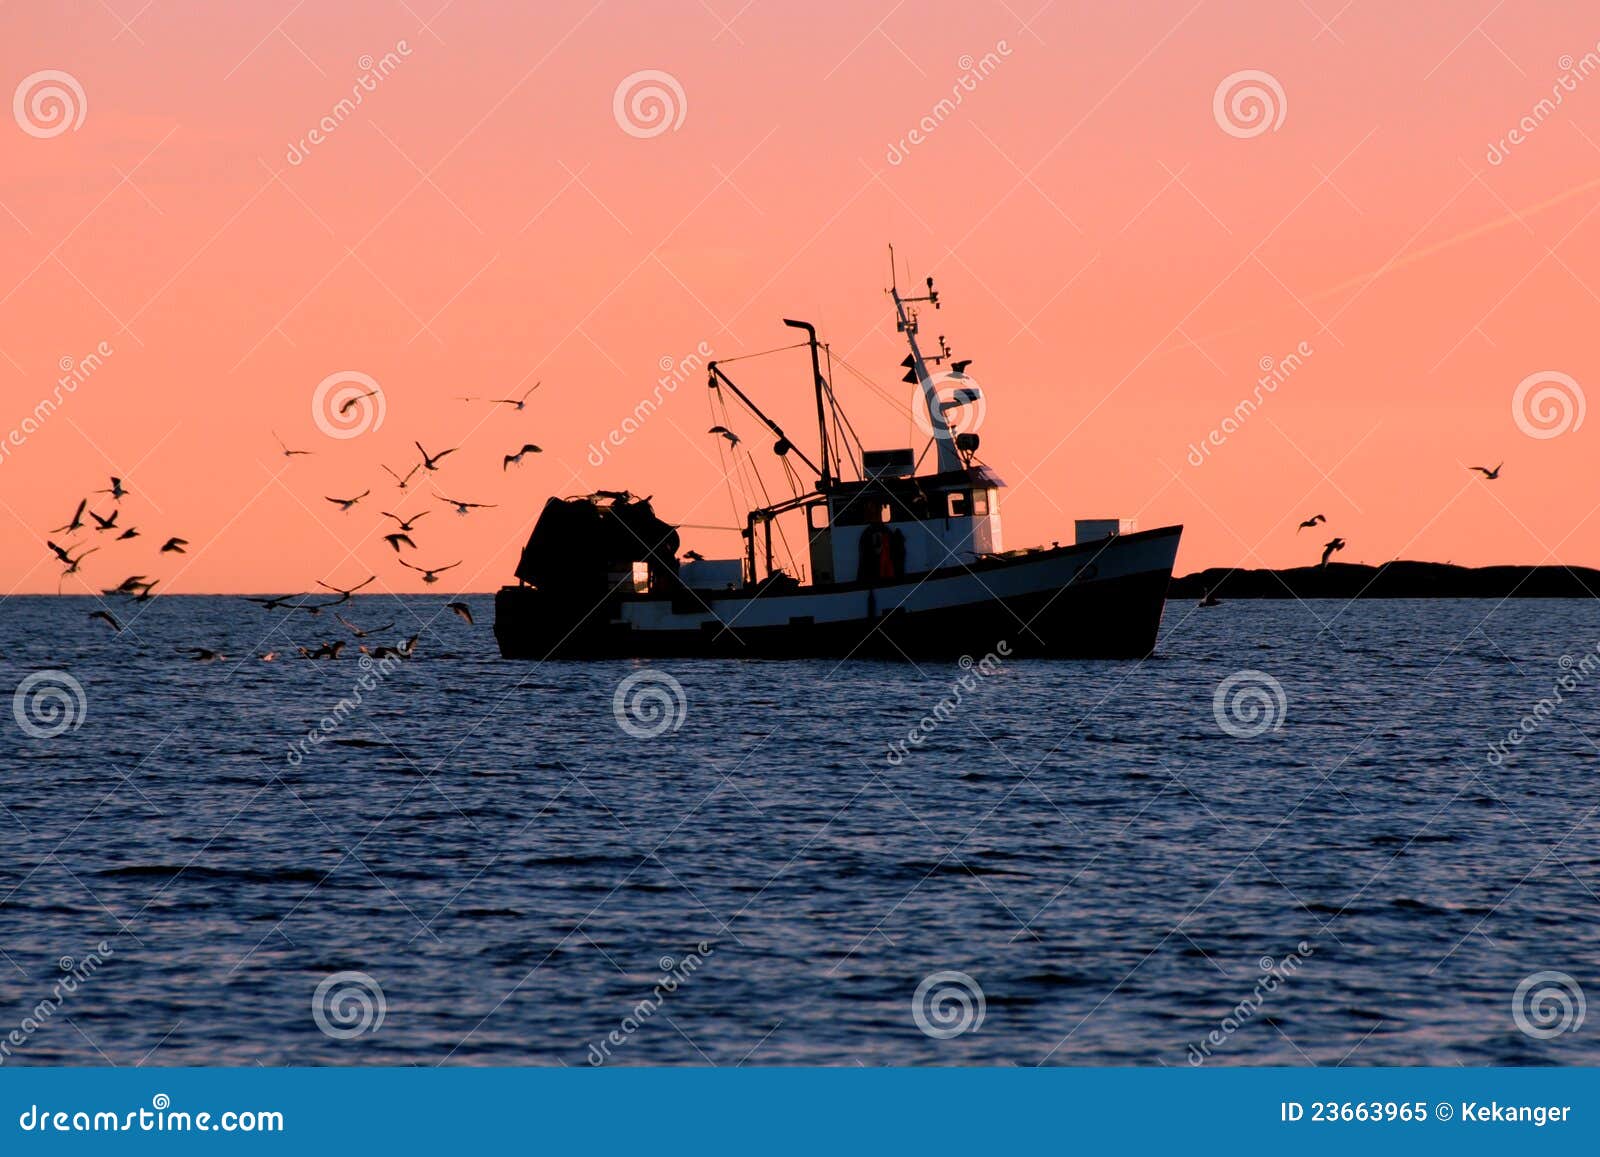 Download Fishing Boat In Silhouette Royalty Free Stock Photo ...